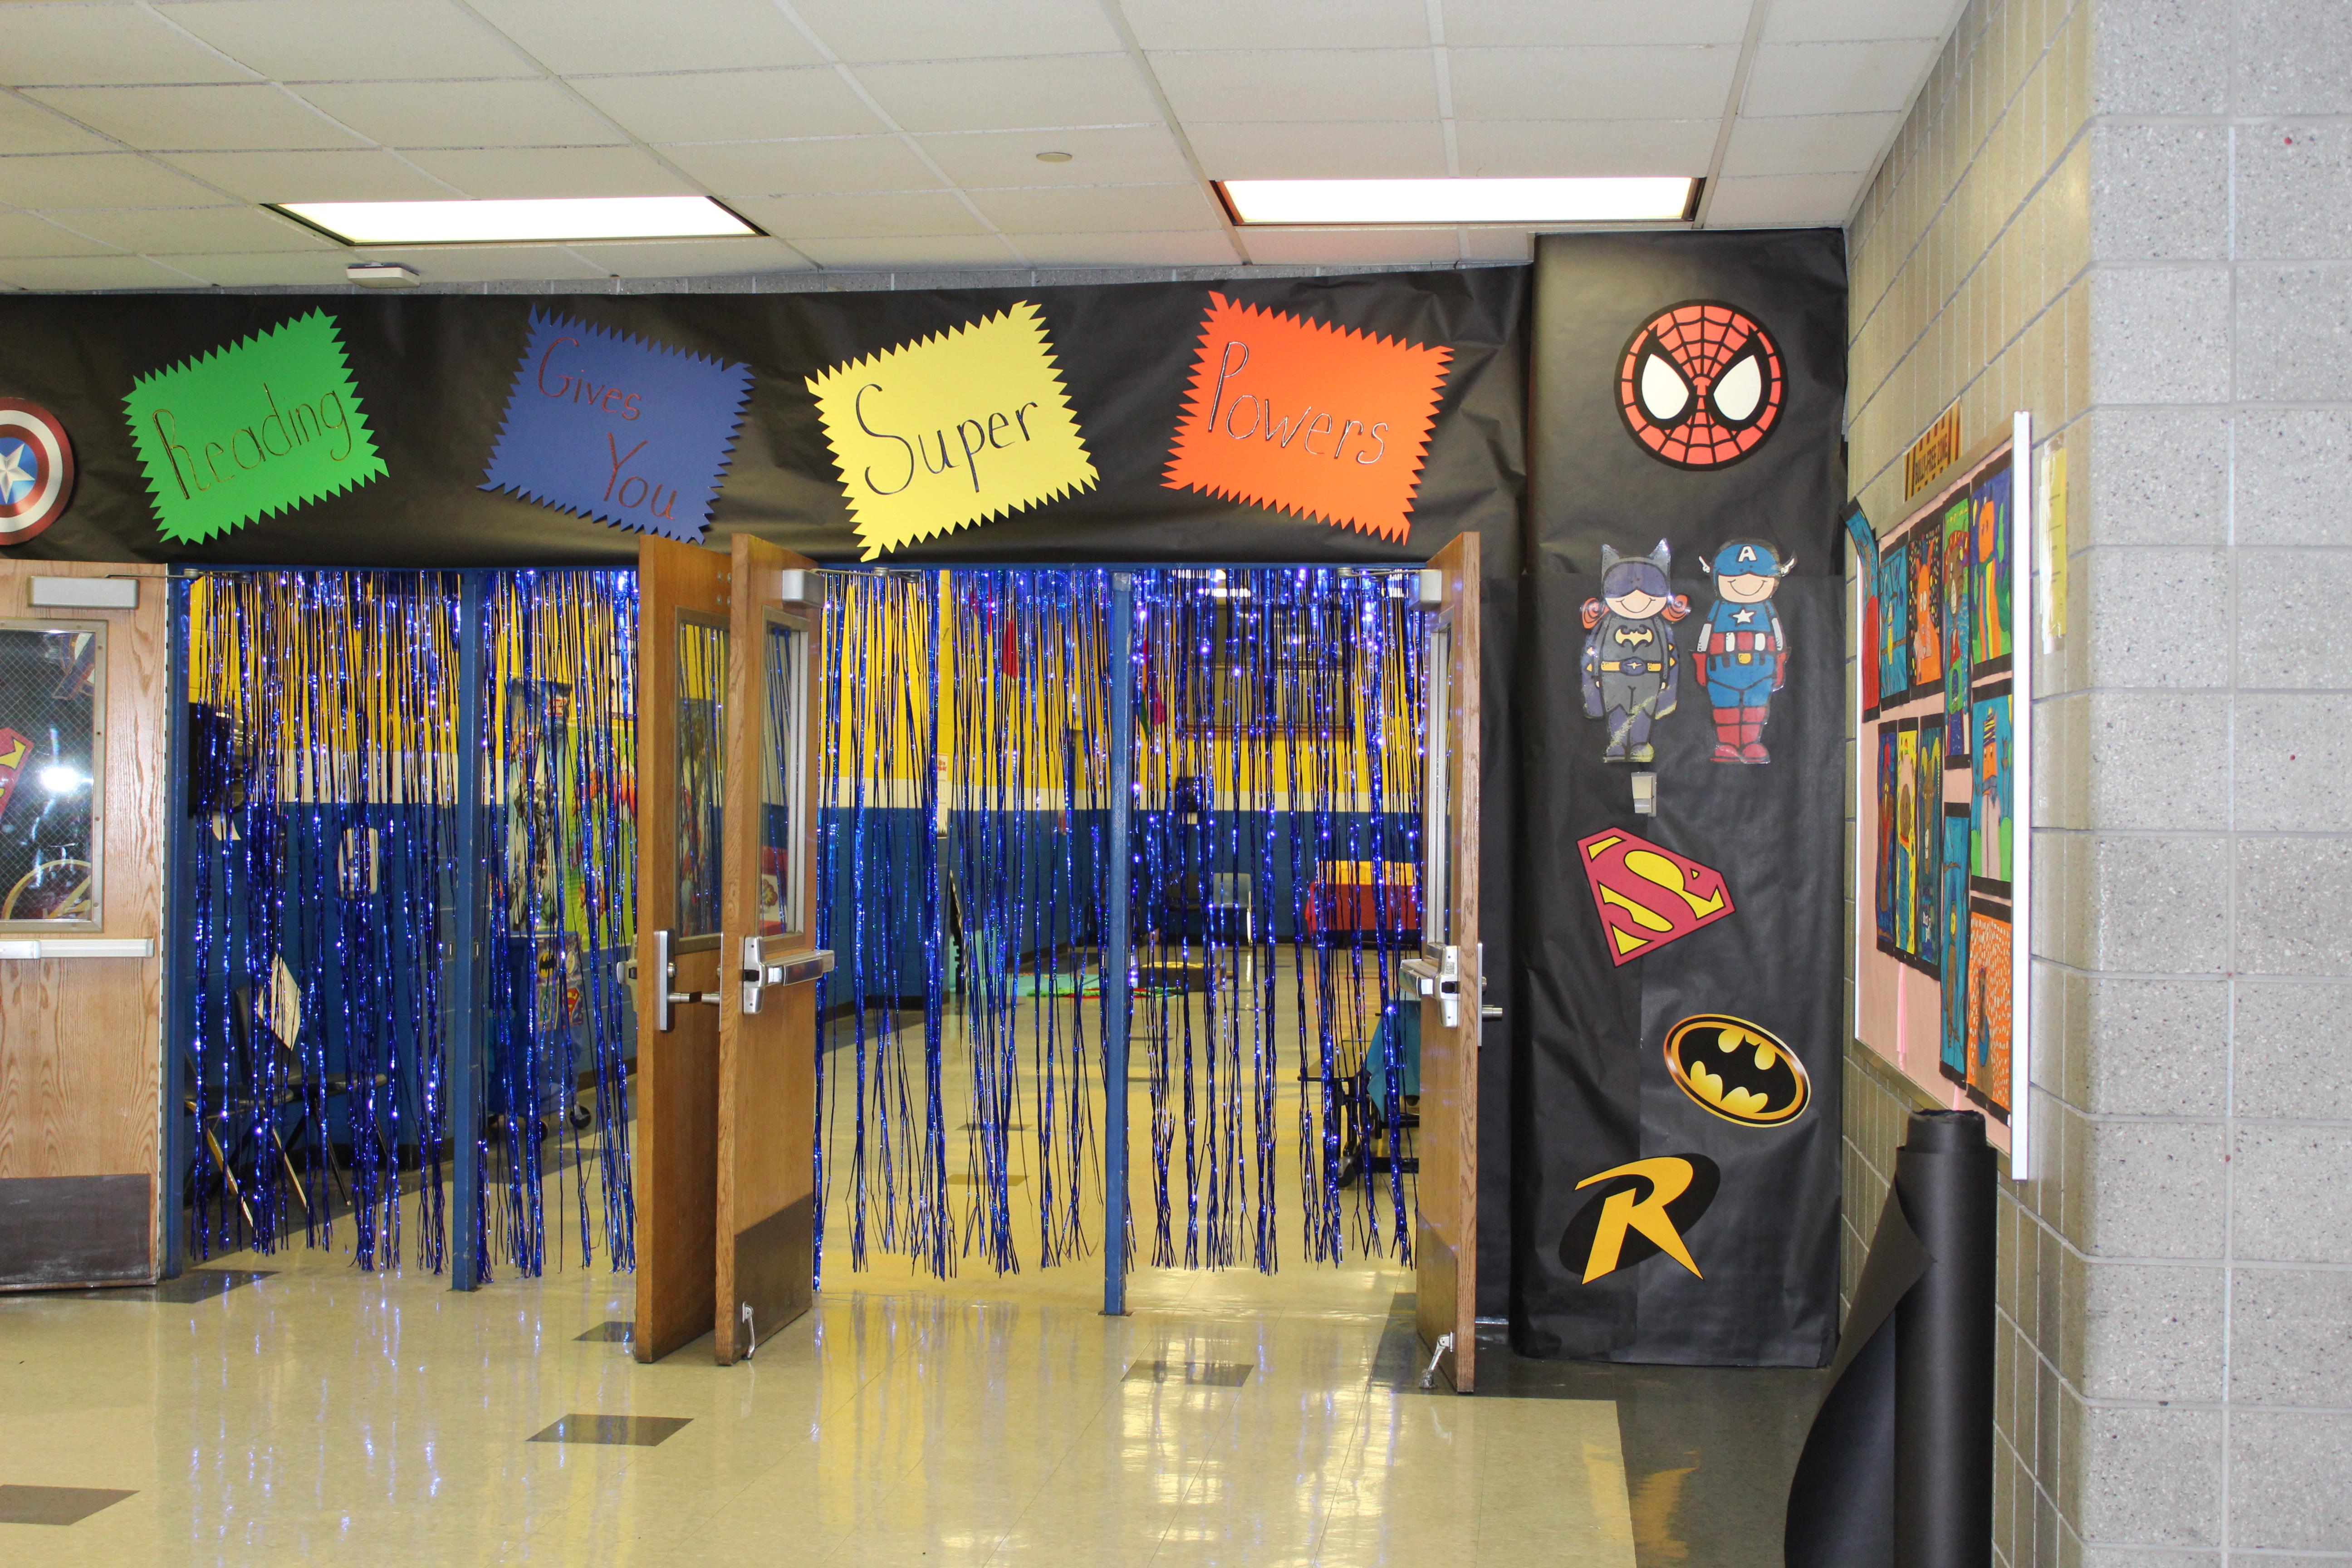 Cafetorium Entryway decorated with superhero symbols and string